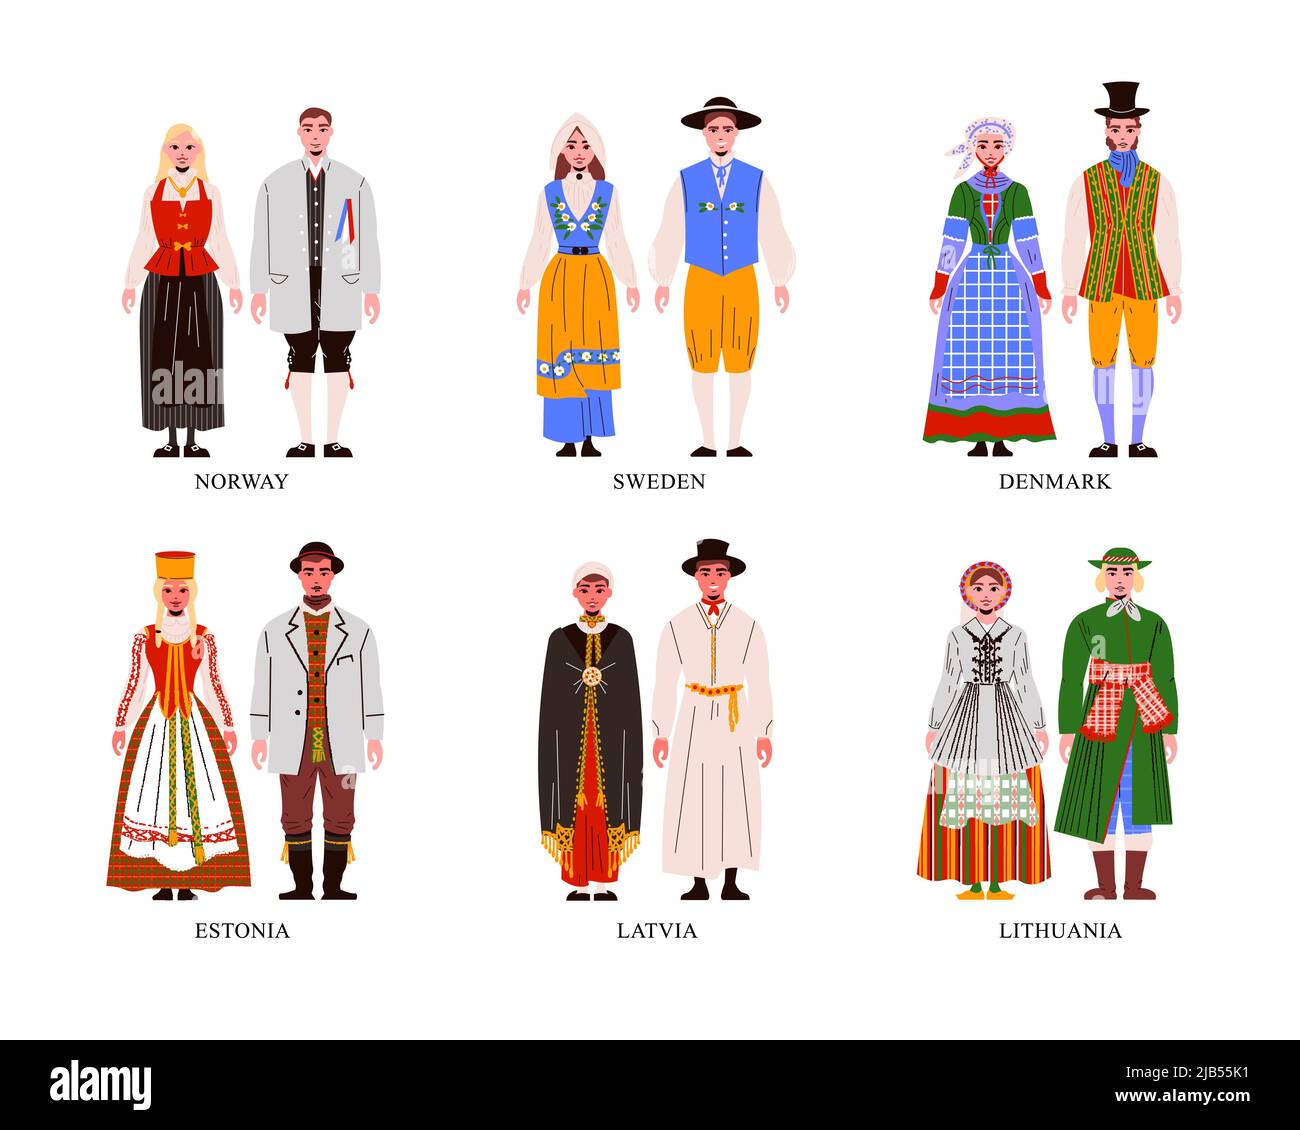 National costume denmark Cut Out Stock Images & Pictures - Alamy